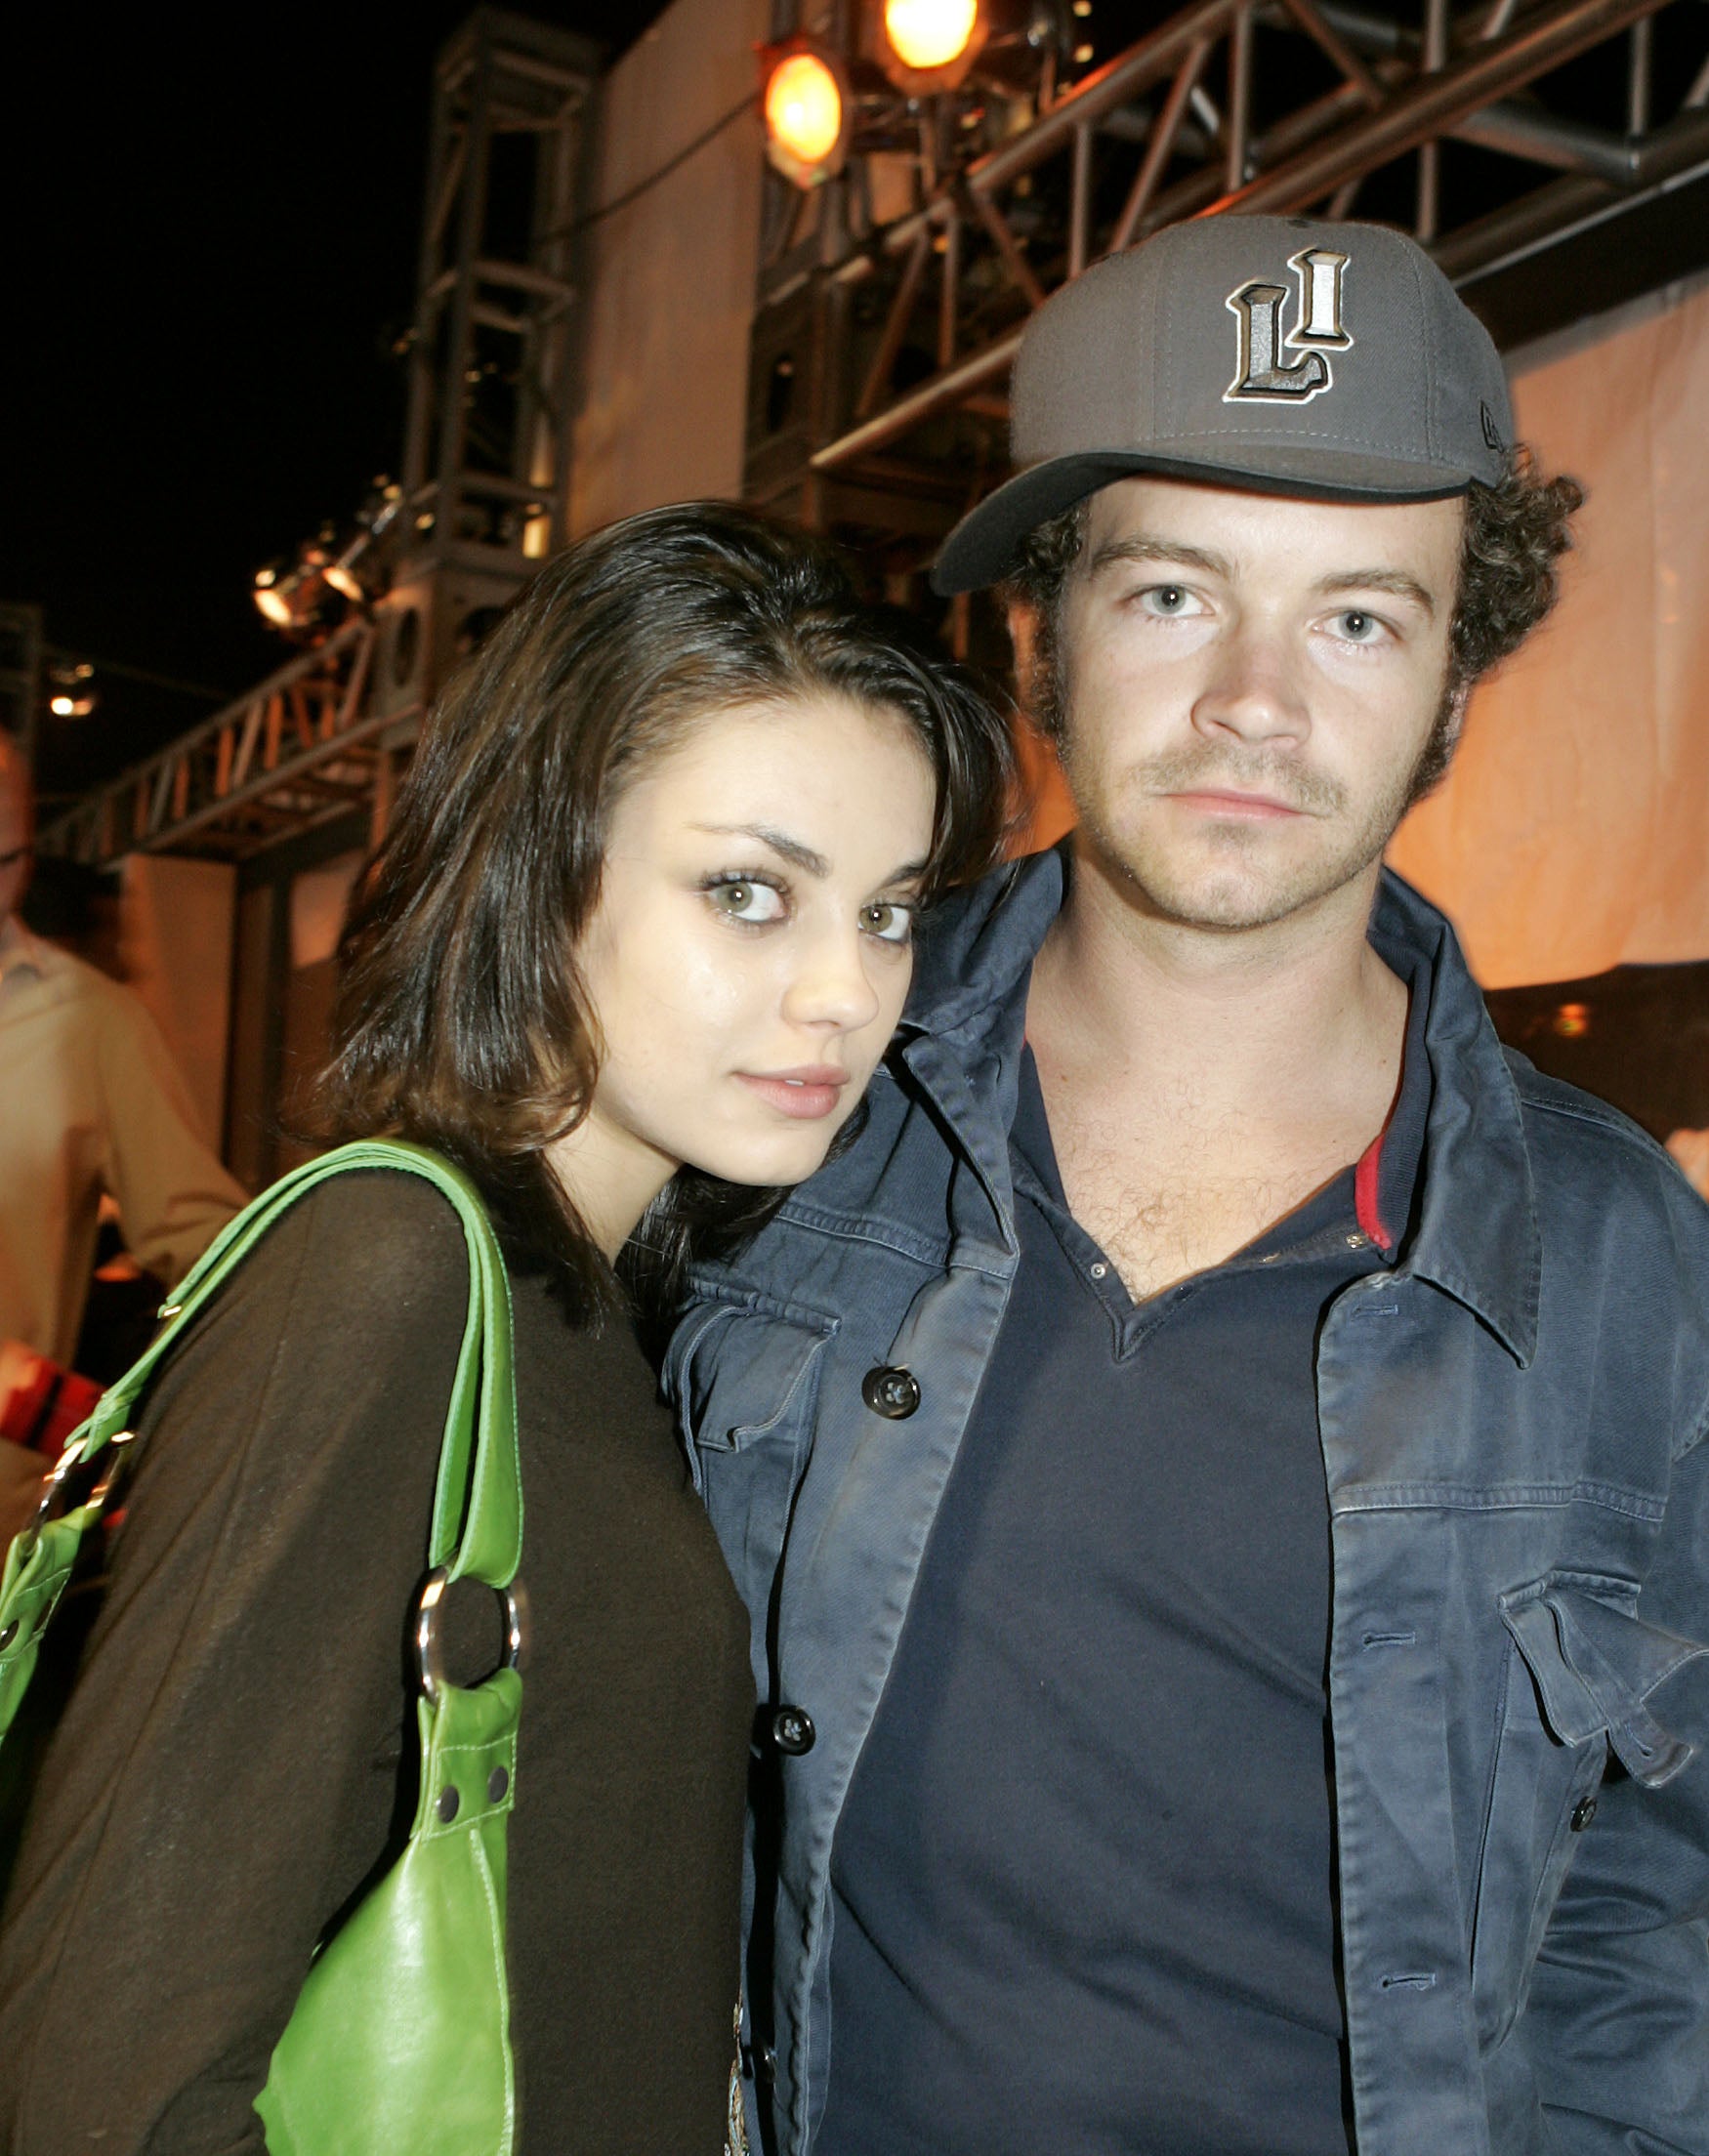 A younger Mila and Danny posing for a photo together